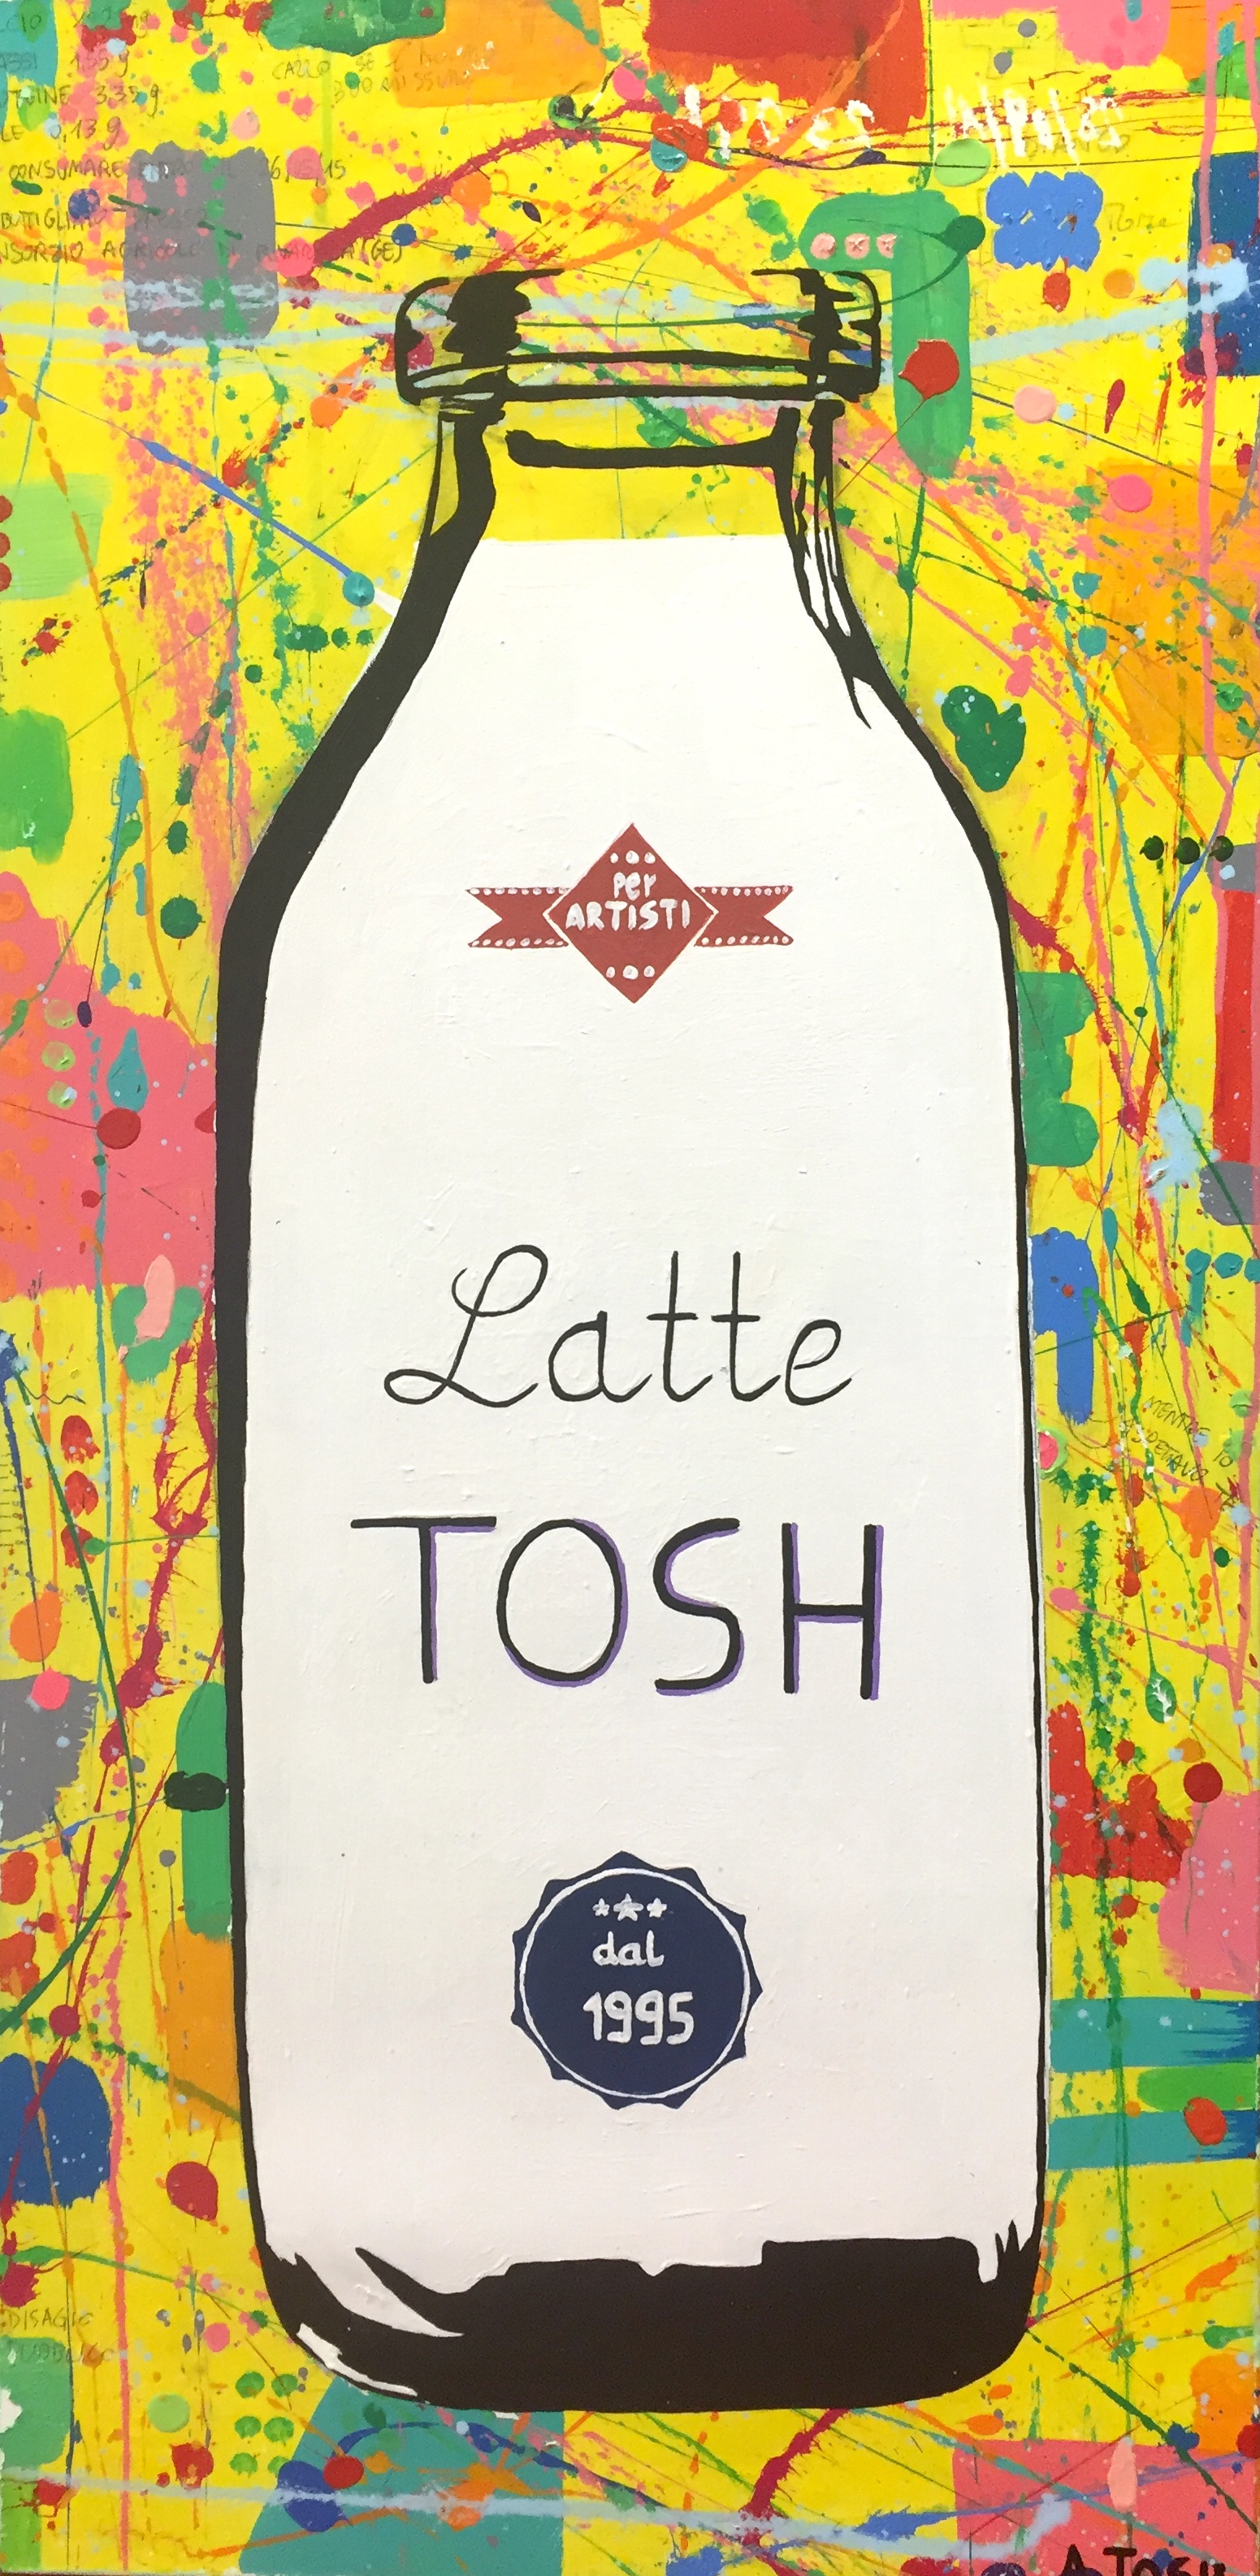 "Latte tosh" - inches 47x24 - Tosh Andrew